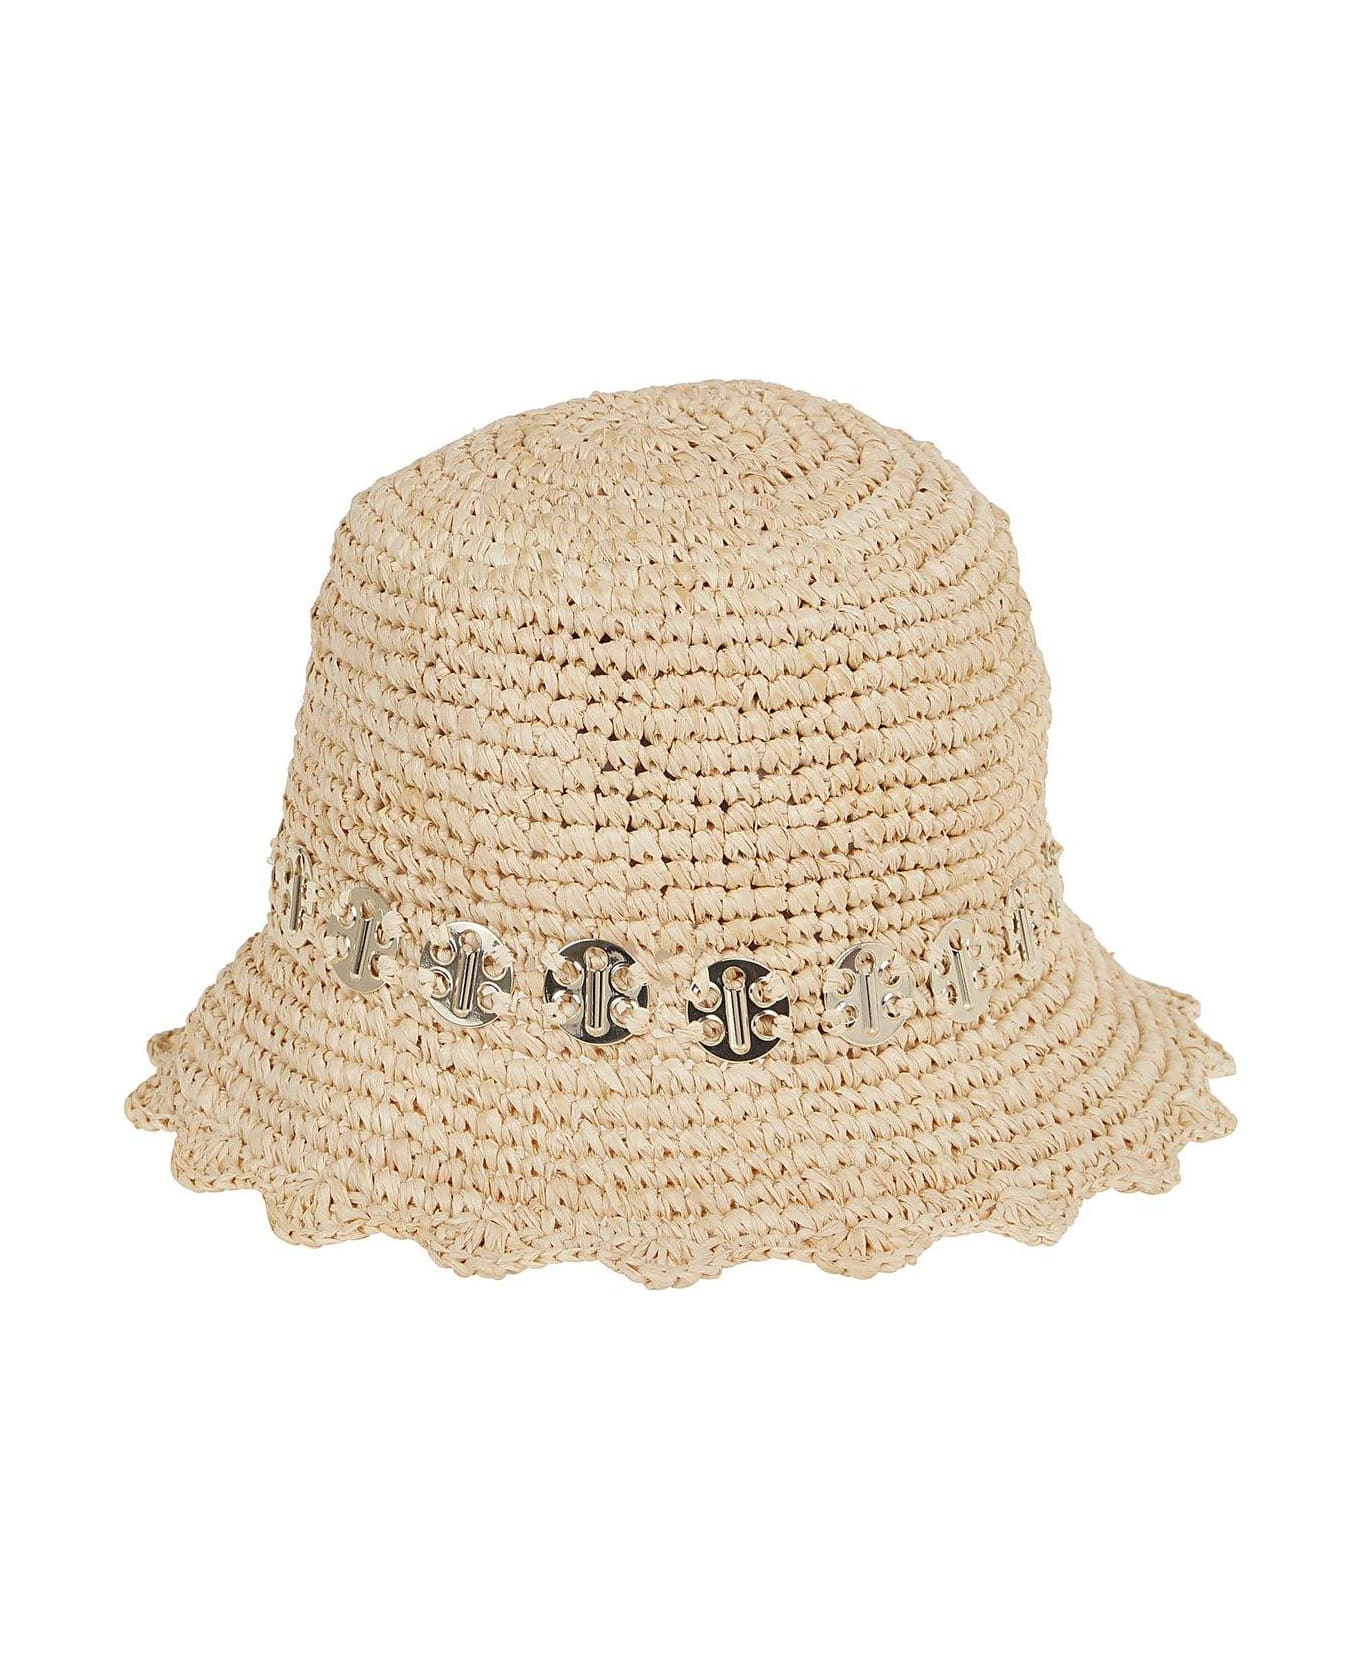 Paco Rabanne Chain-linked Bucket Hat - NATURAL LIGHT GOLD